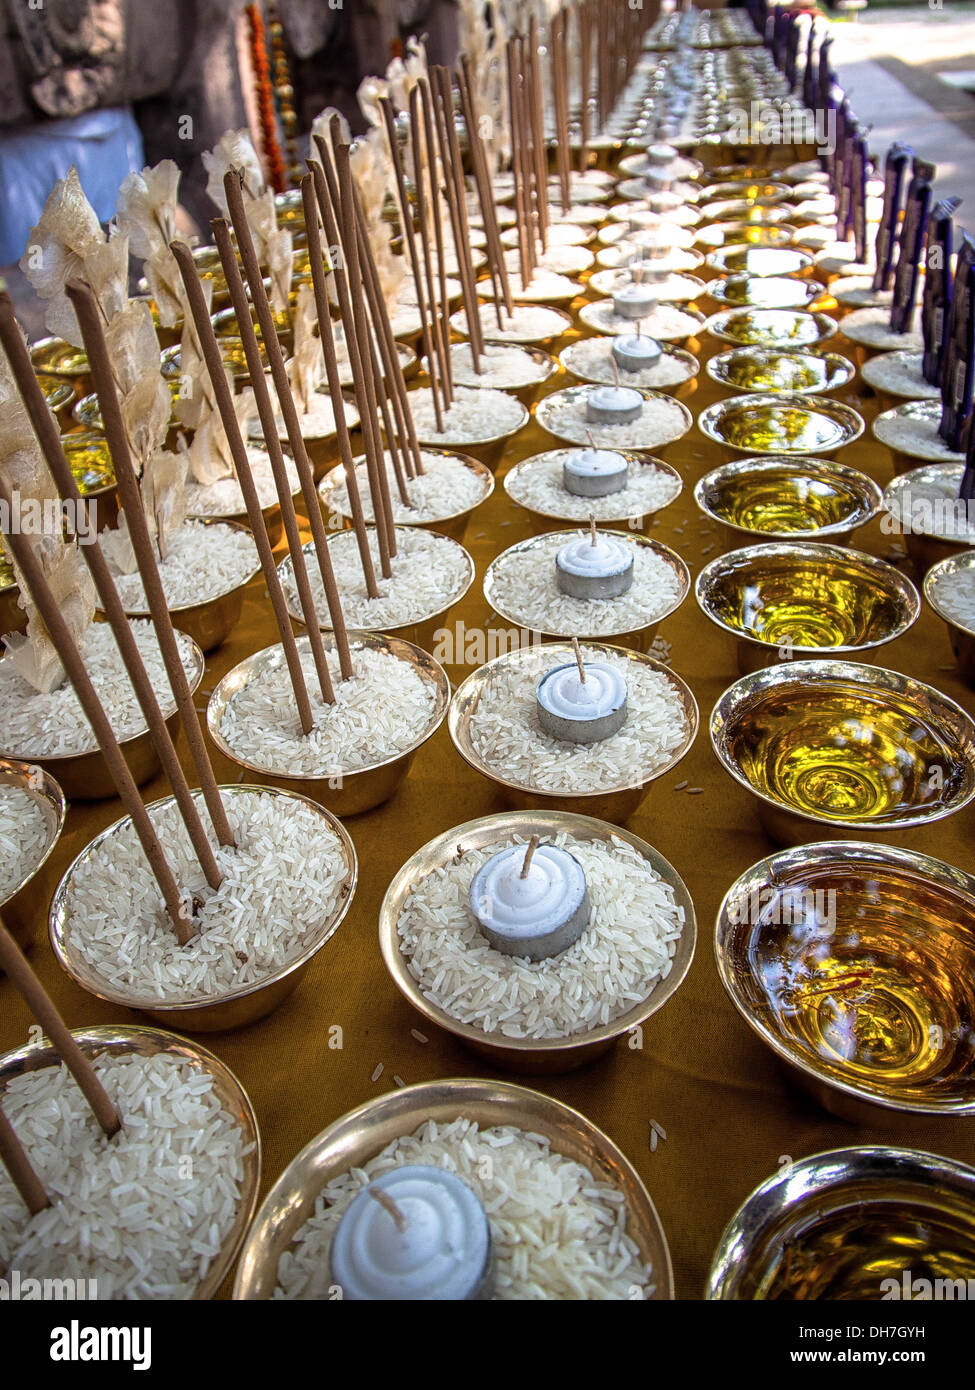 Candles, incense, rice and chocolate bars lined up as ceremonial offerings at the Mahabodhi Temple in Bodhgaya, India. Stock Photo